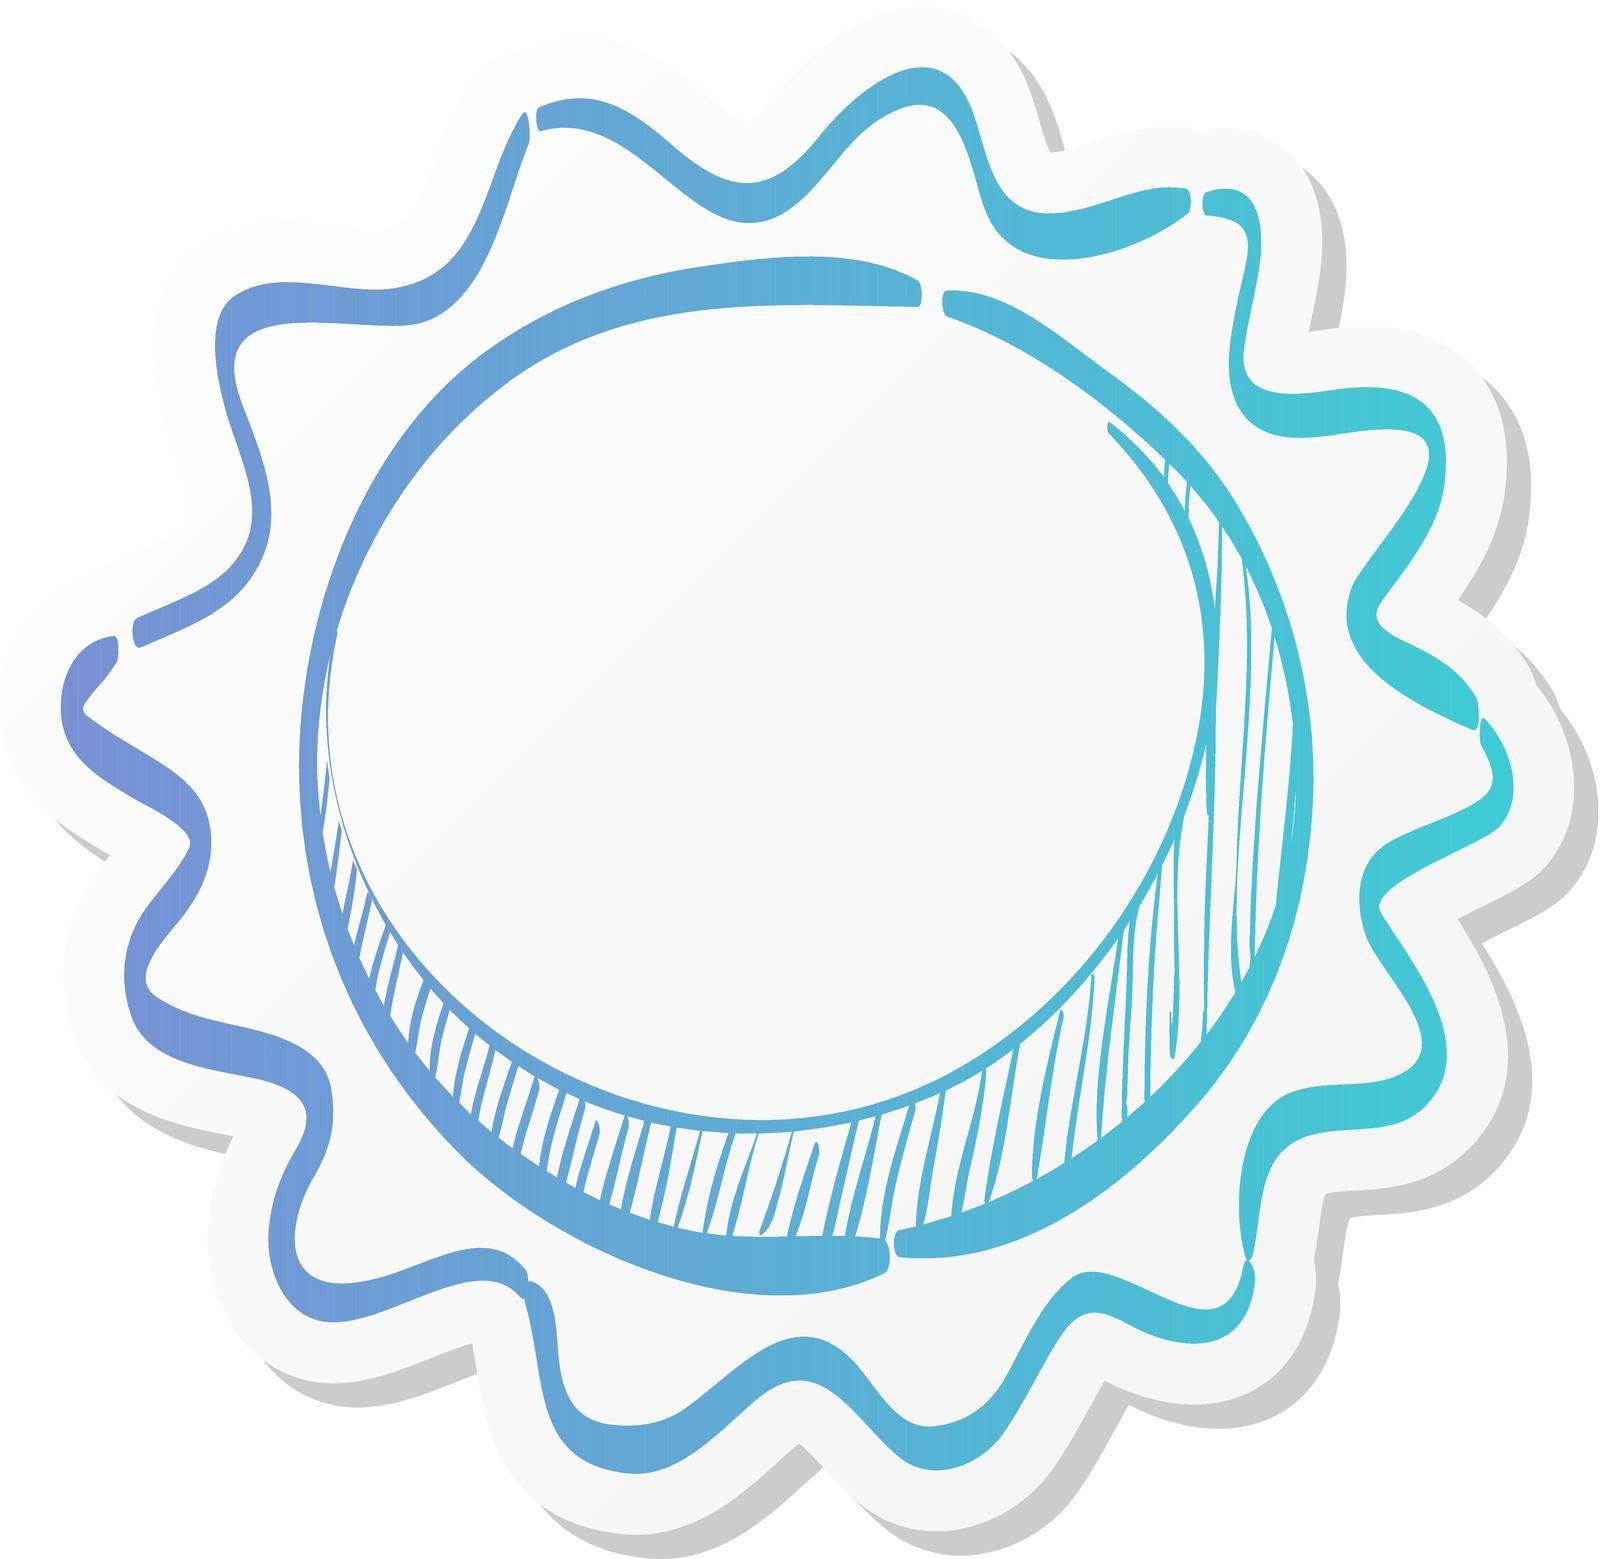 Sticker style icon - Hot item label by puruan